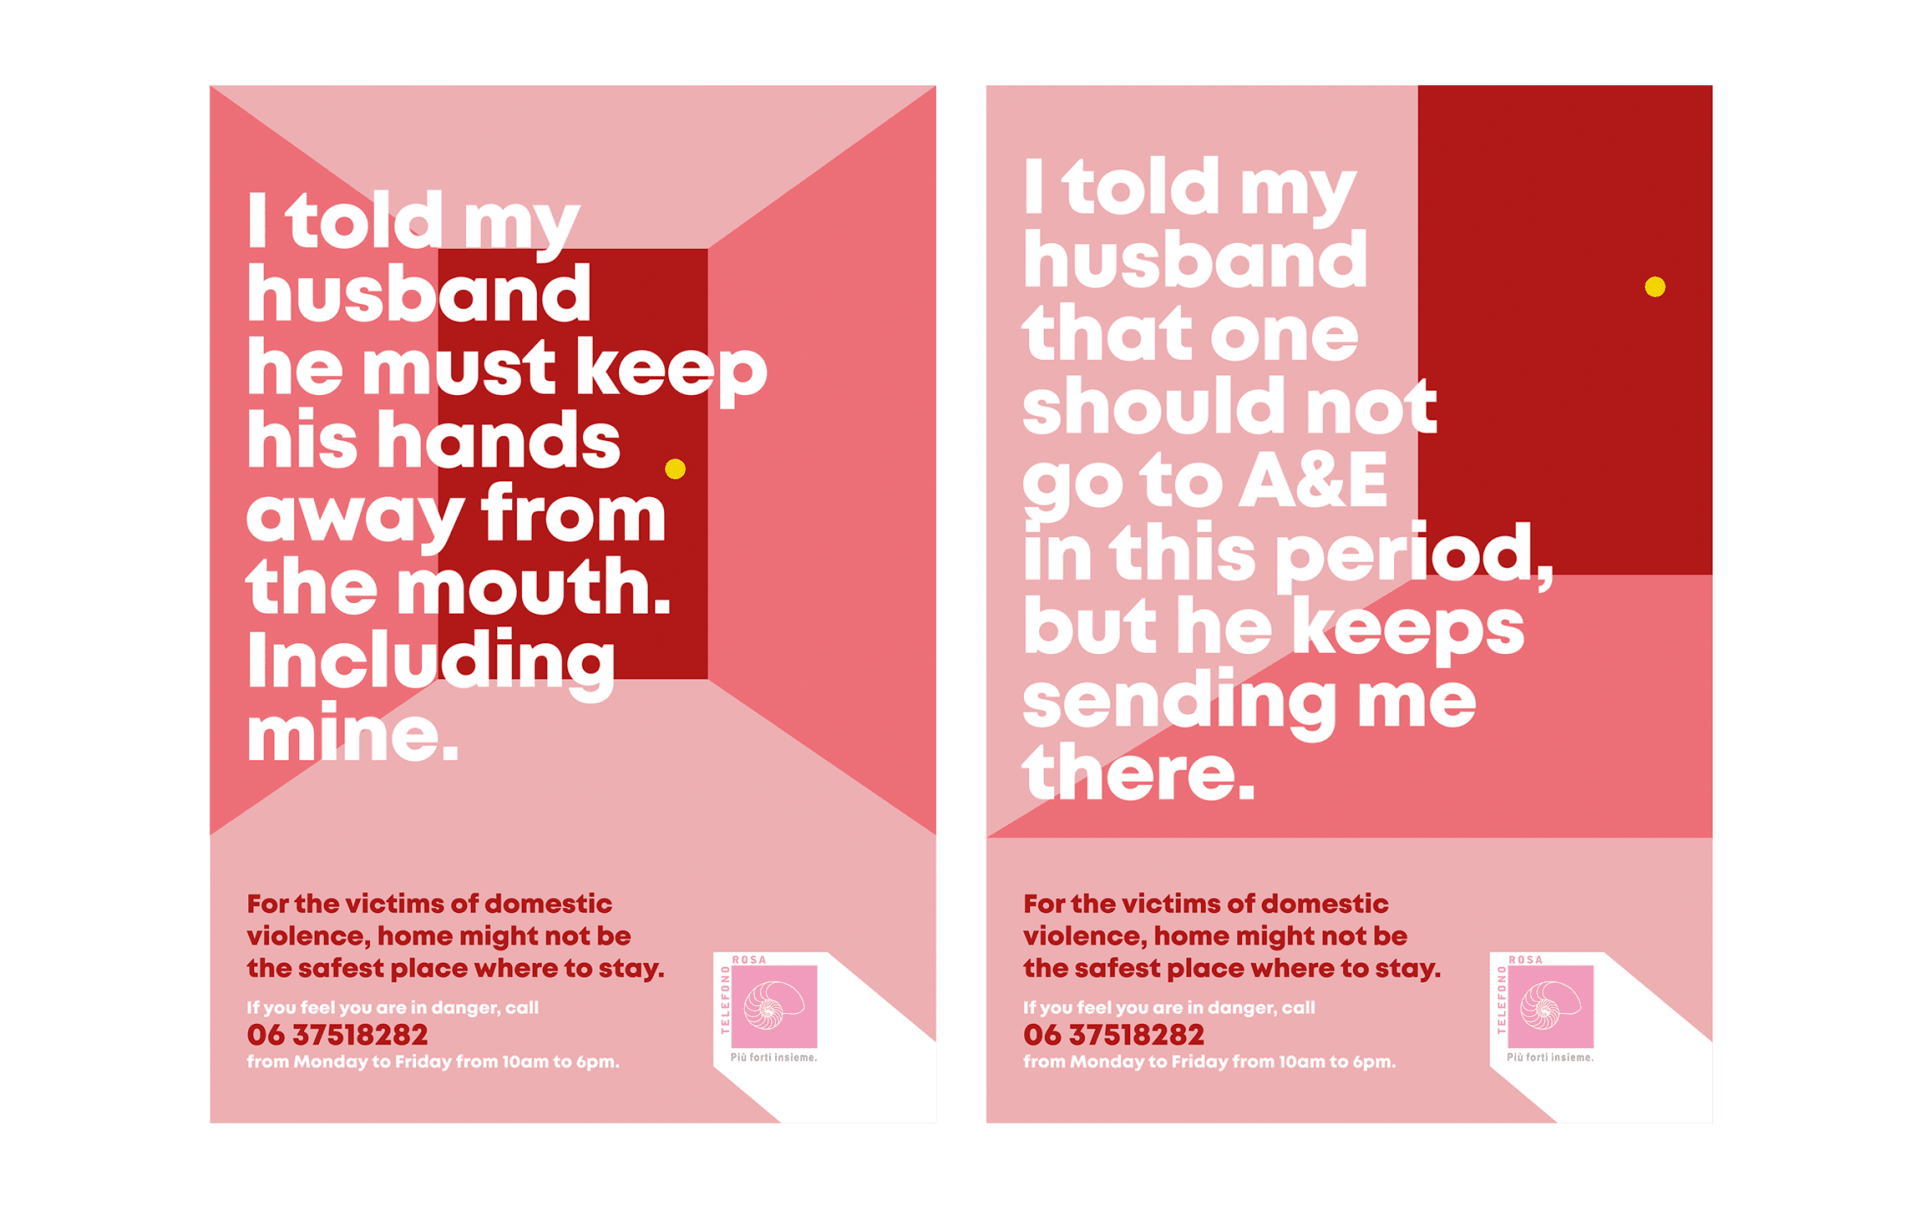 I told my husband ... phrases on red and rose background for Telefono Rosa campaign